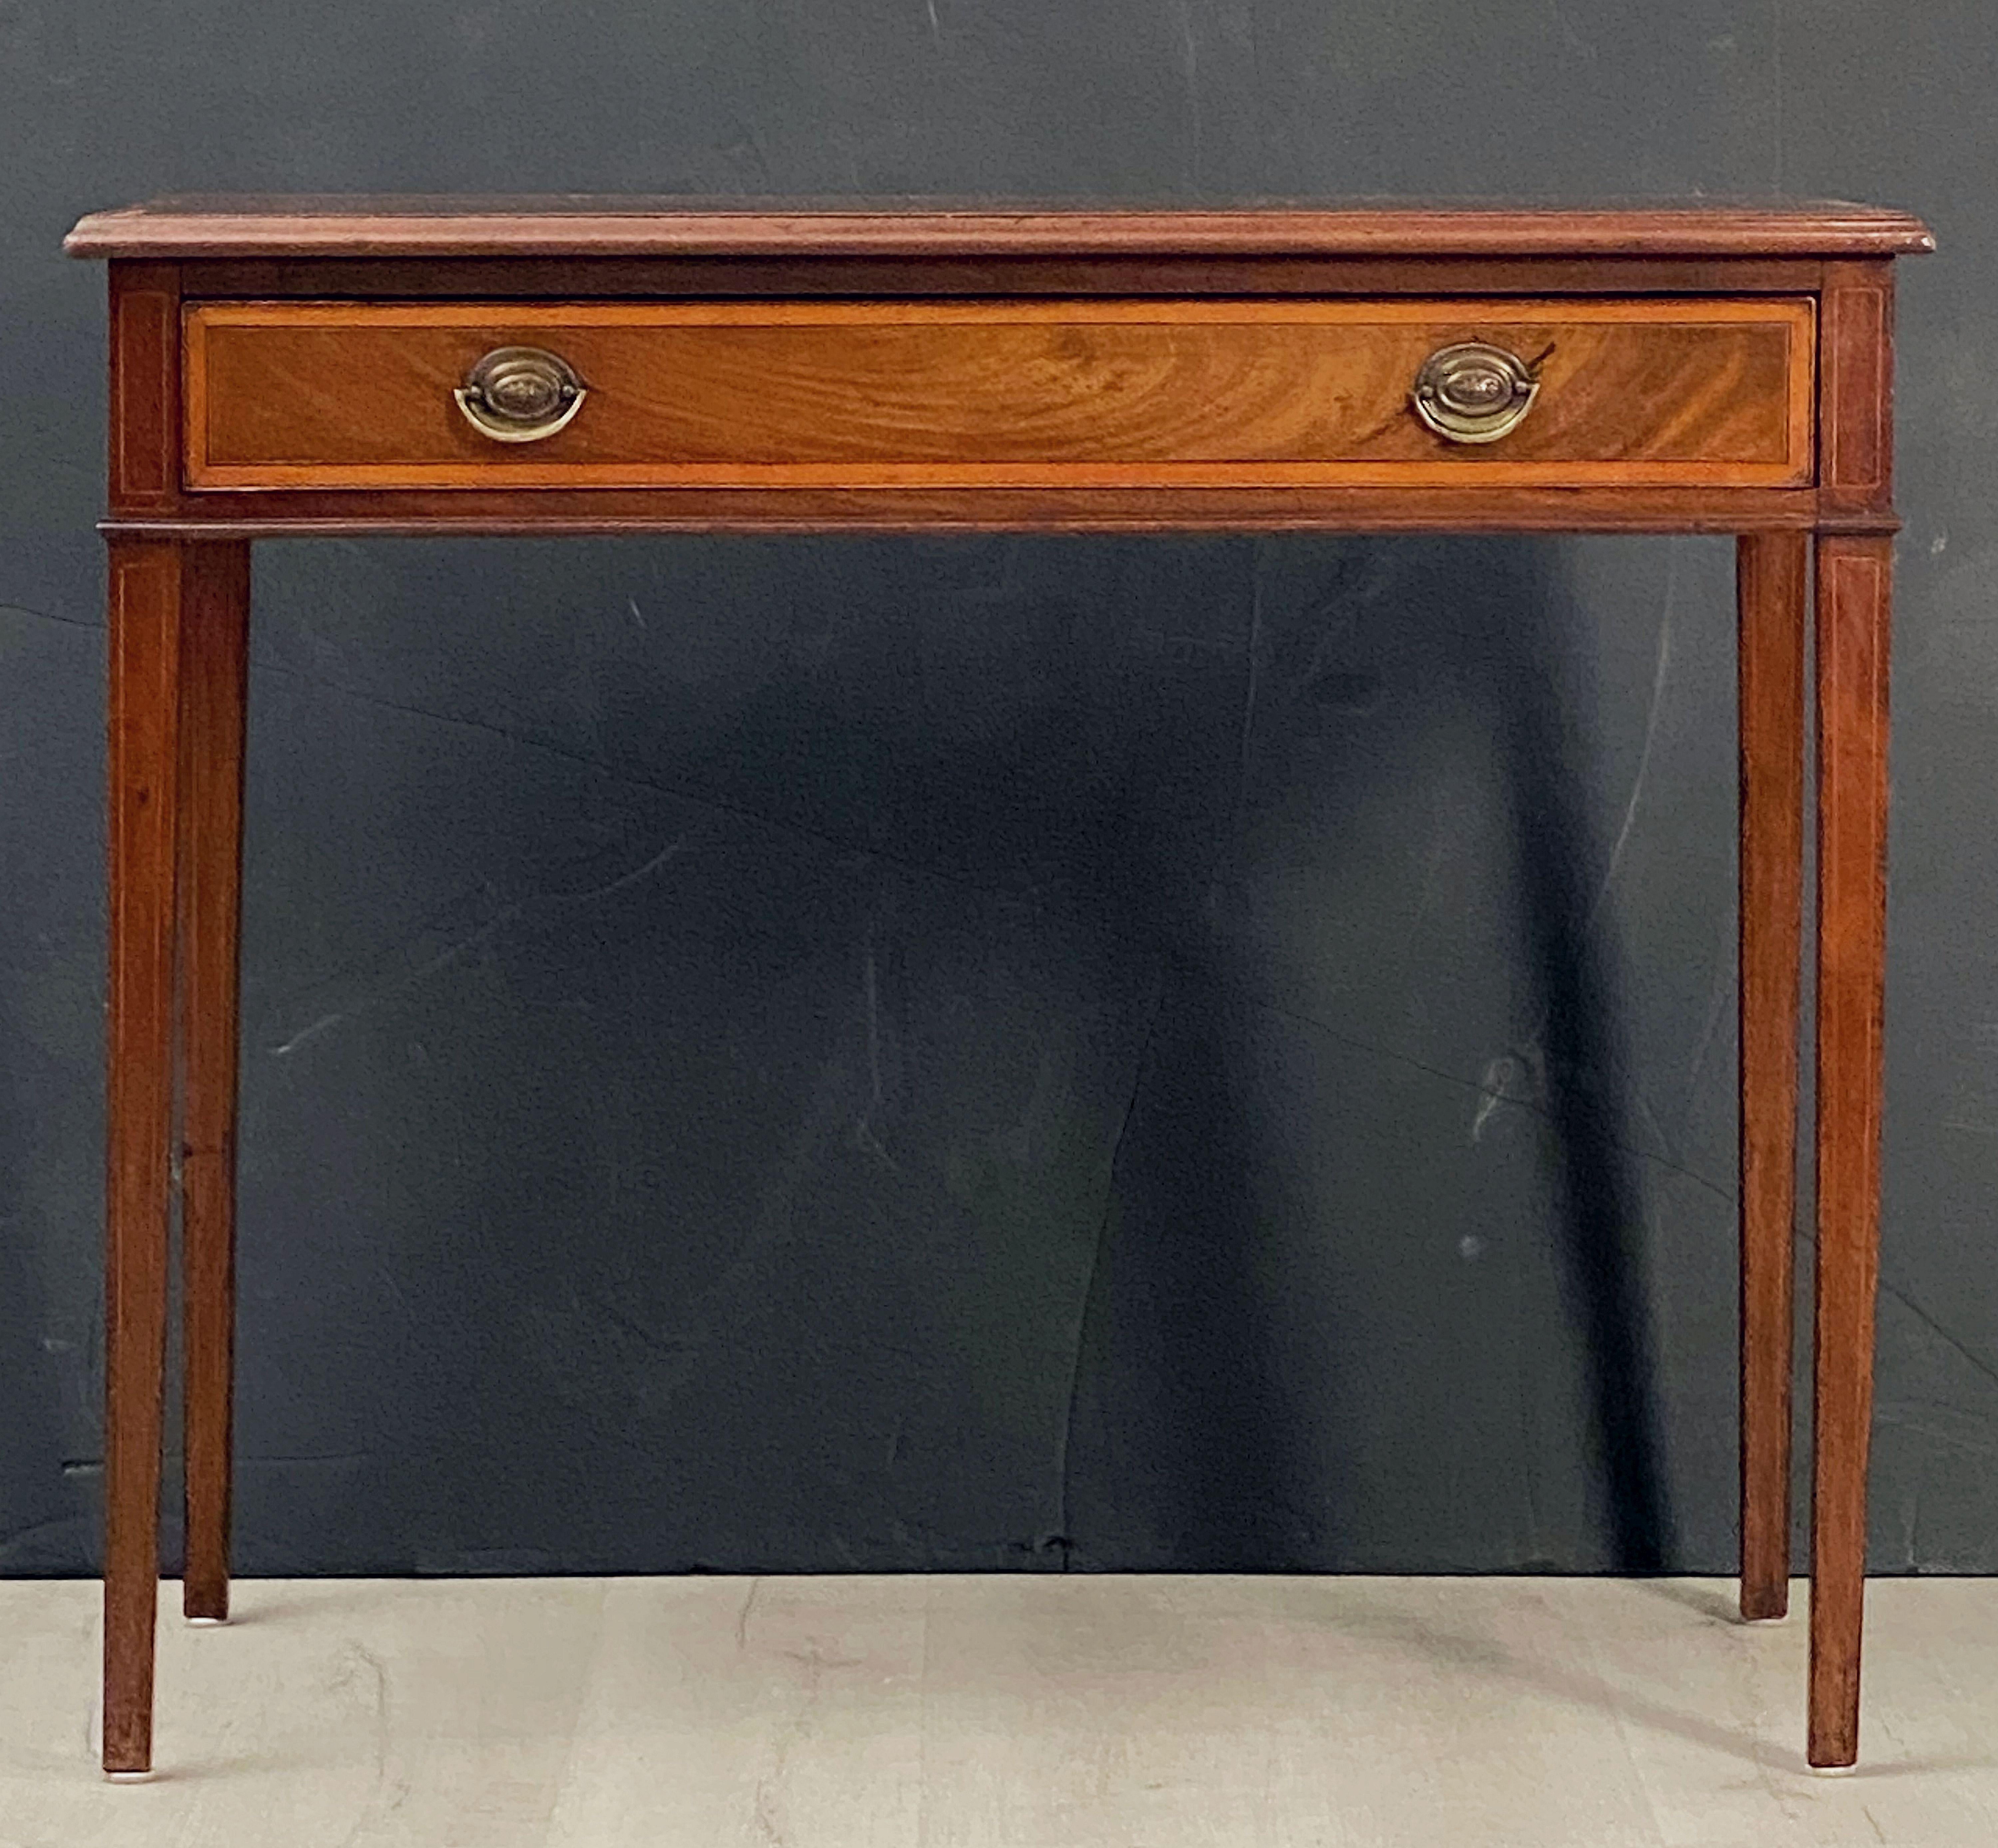 A fine English desk or writing table from the Georgian era, featuring a moulded rectangular top of mahogany with inlaid satinwood edge.
Over a frieze of one long drawer with two brass pulls and displaying lovely flame-cut mahogany veneers with